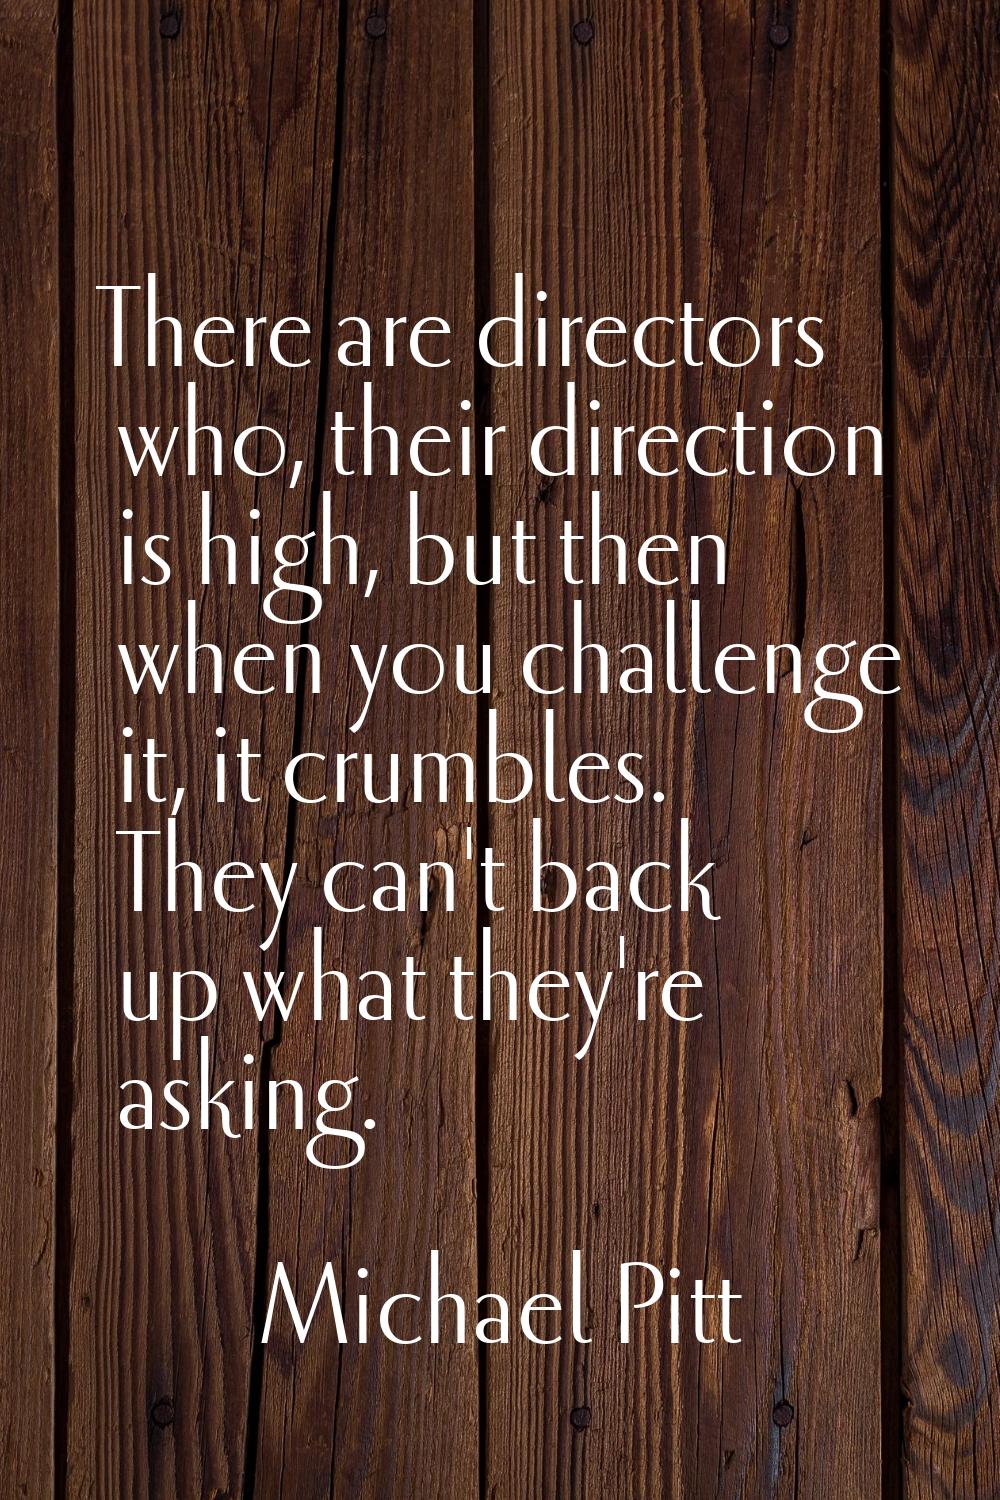 There are directors who, their direction is high, but then when you challenge it, it crumbles. They